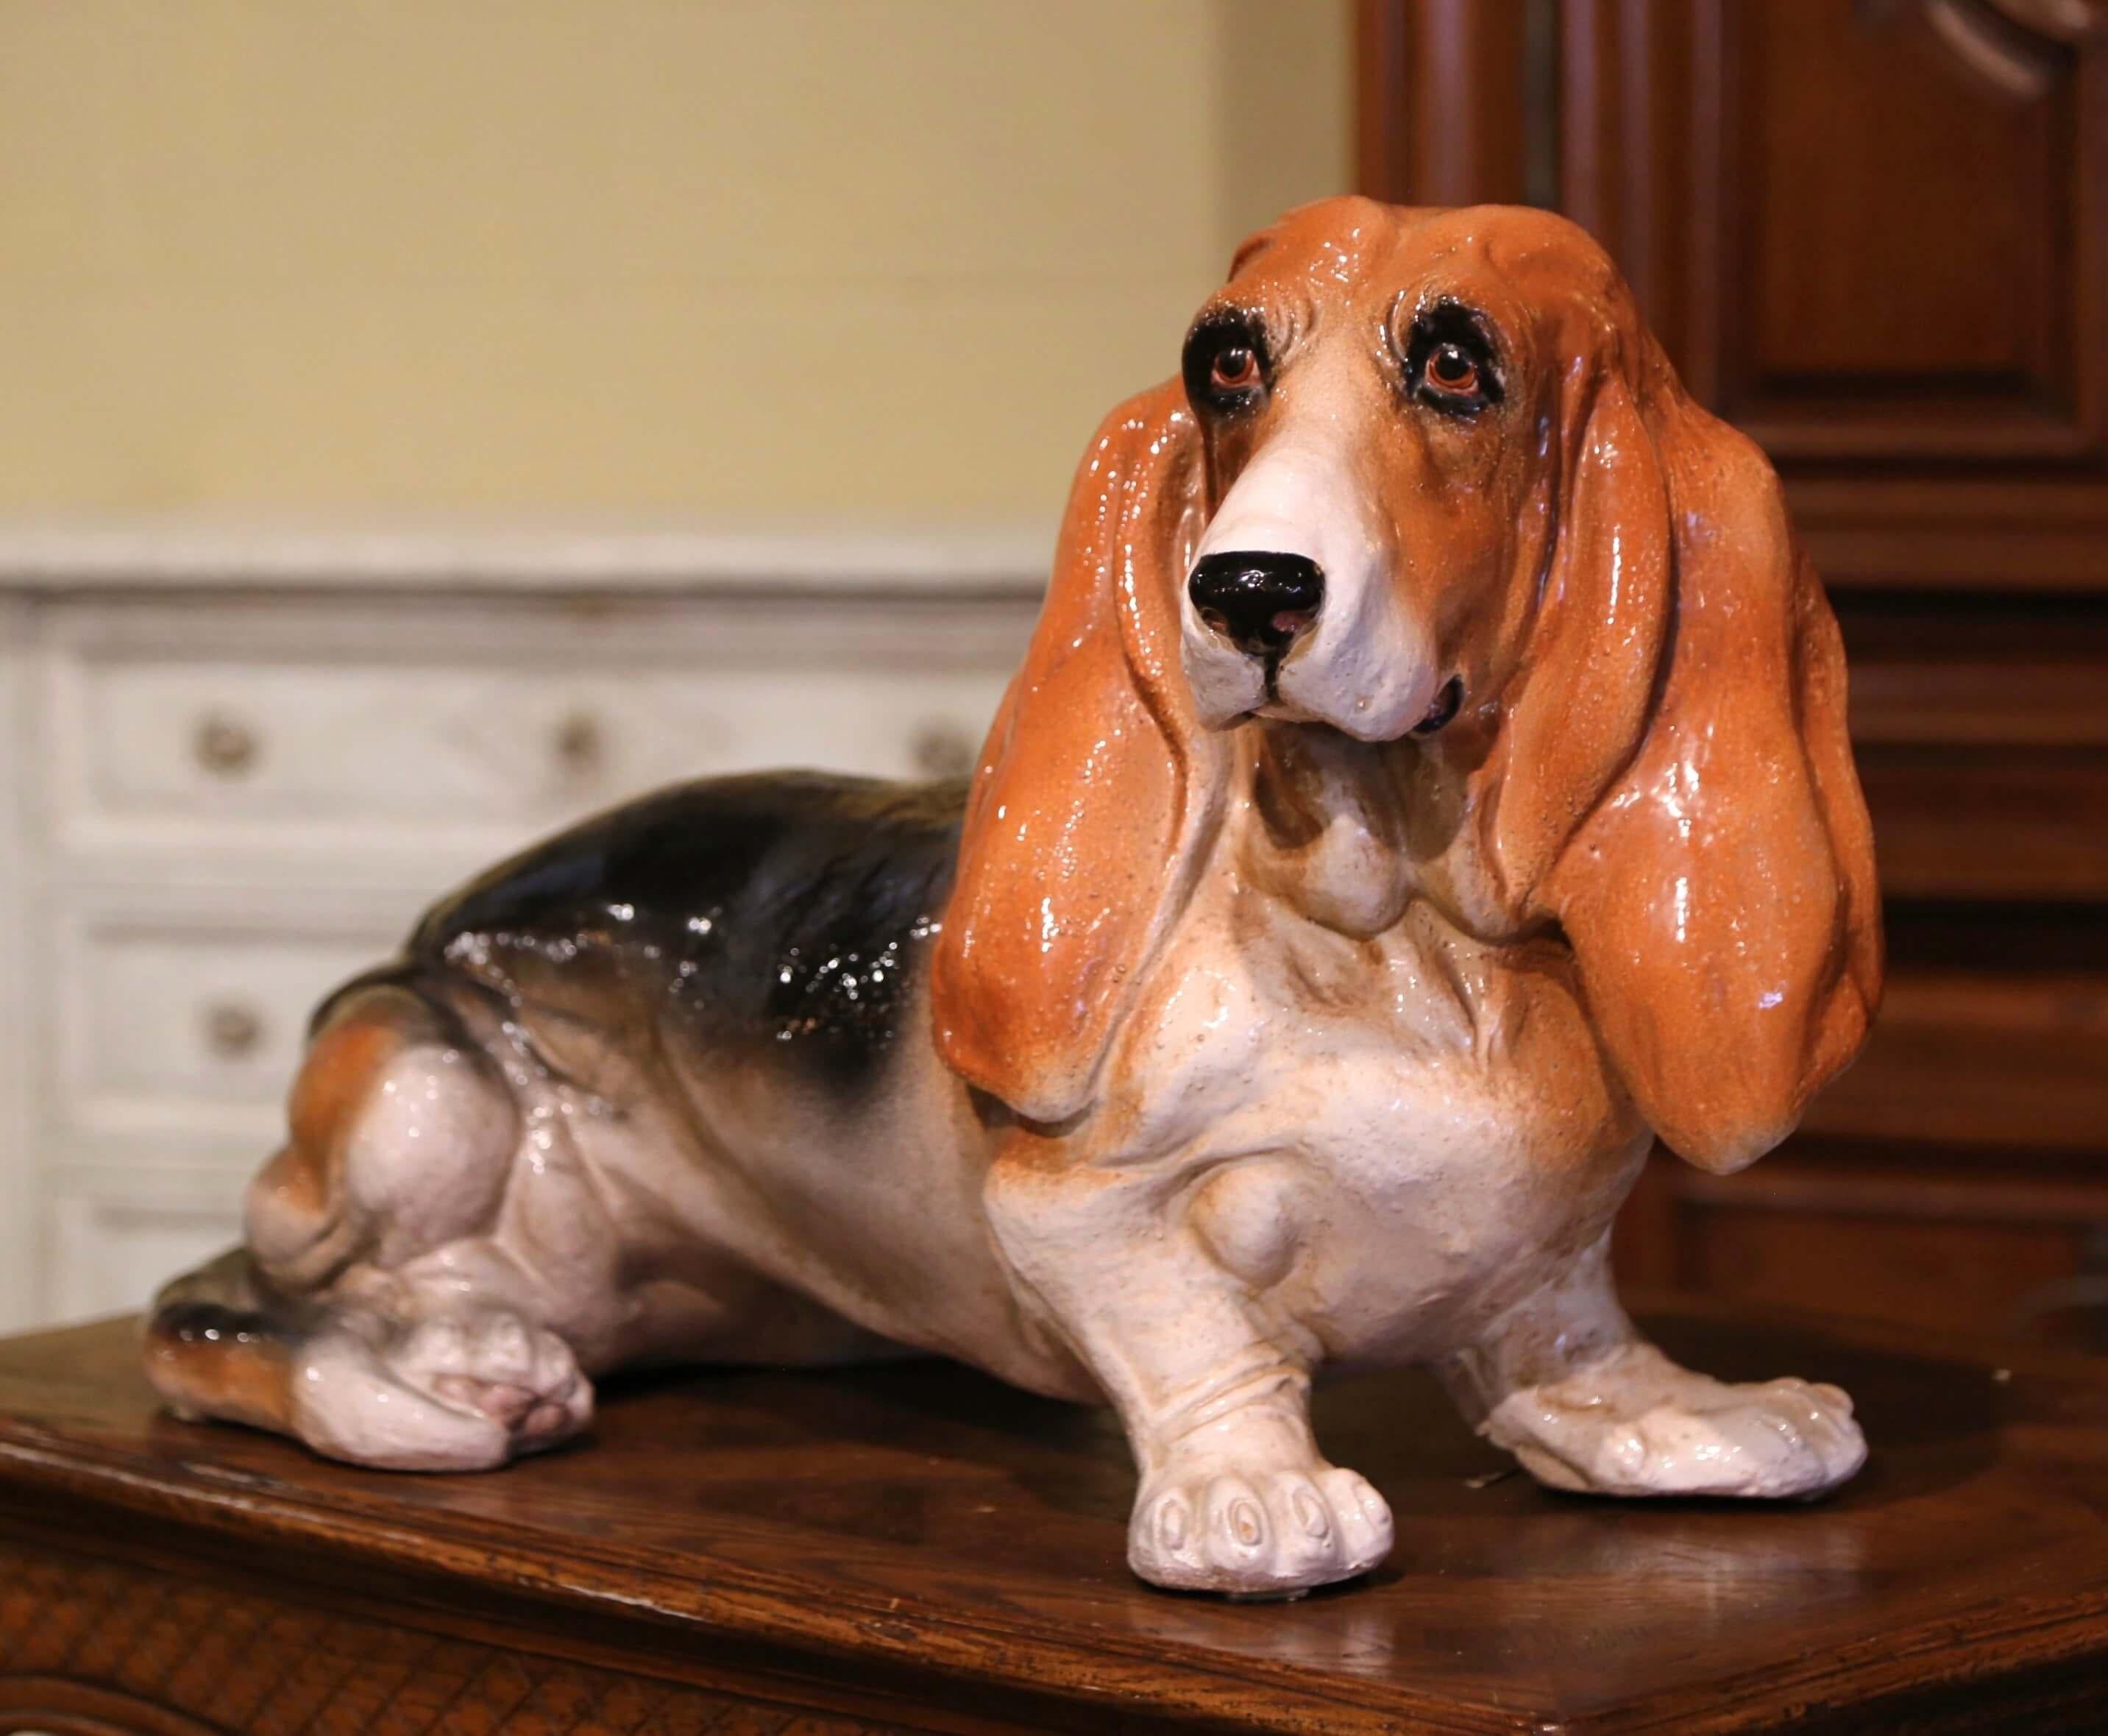 Dog lovers will appreciate this realistic vintage hound dog. Crafted in Italy, circa 1950, this charming terracotta statue is life-size, and depicts a sitting basset hound gazing forward. Boasting lovely russet, black and white colors that